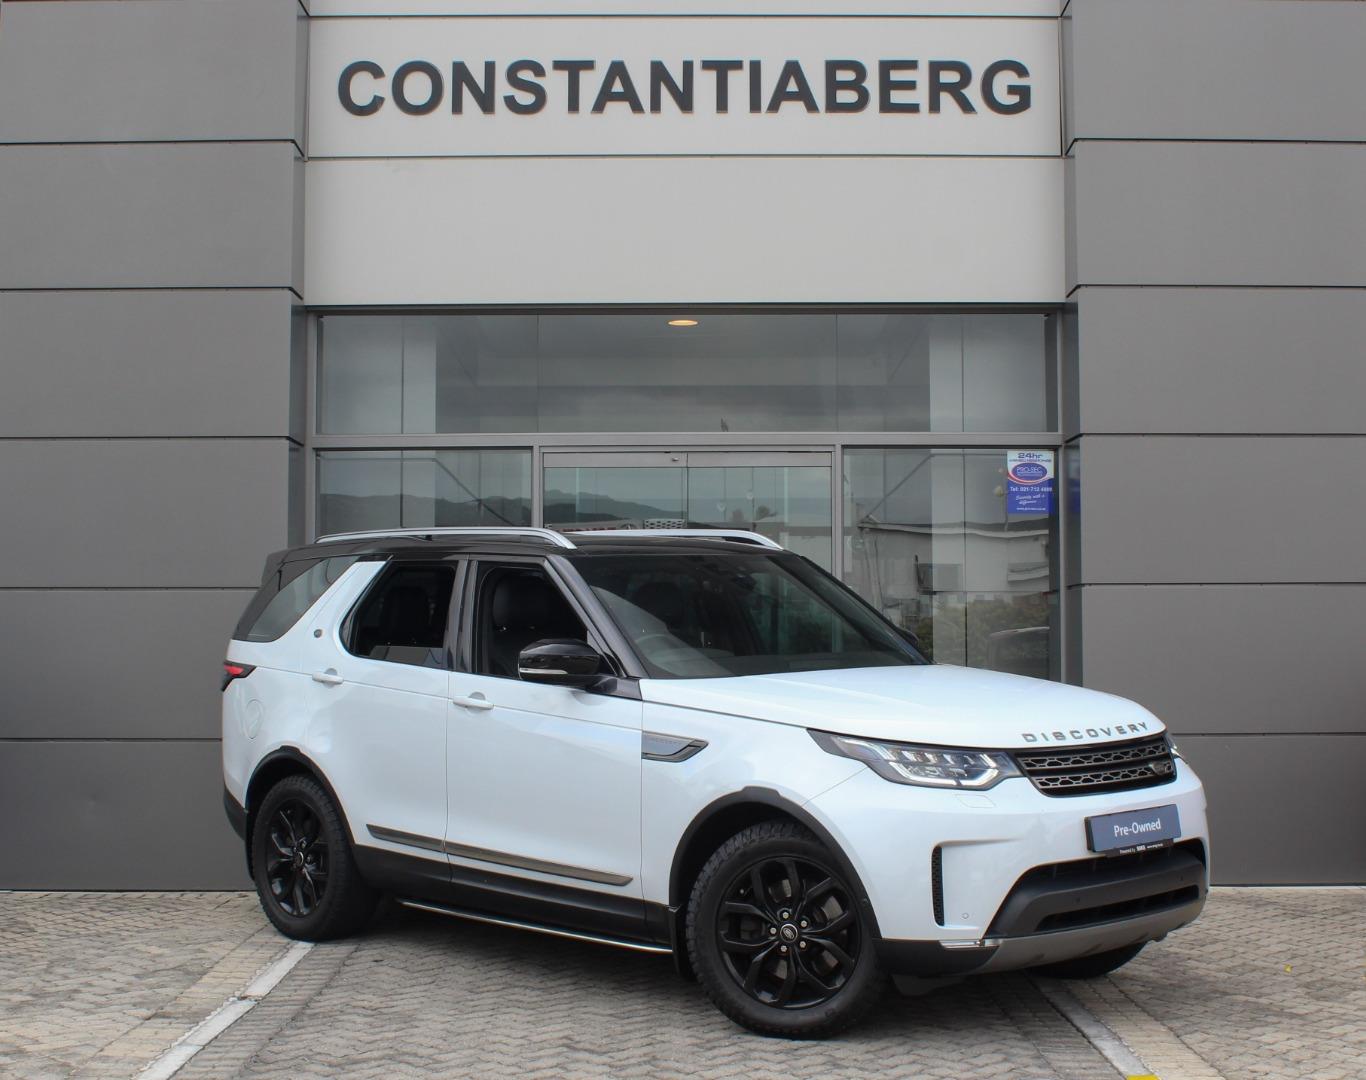 2017 Land Rover Discovery  for sale - SMG11|USED|501984